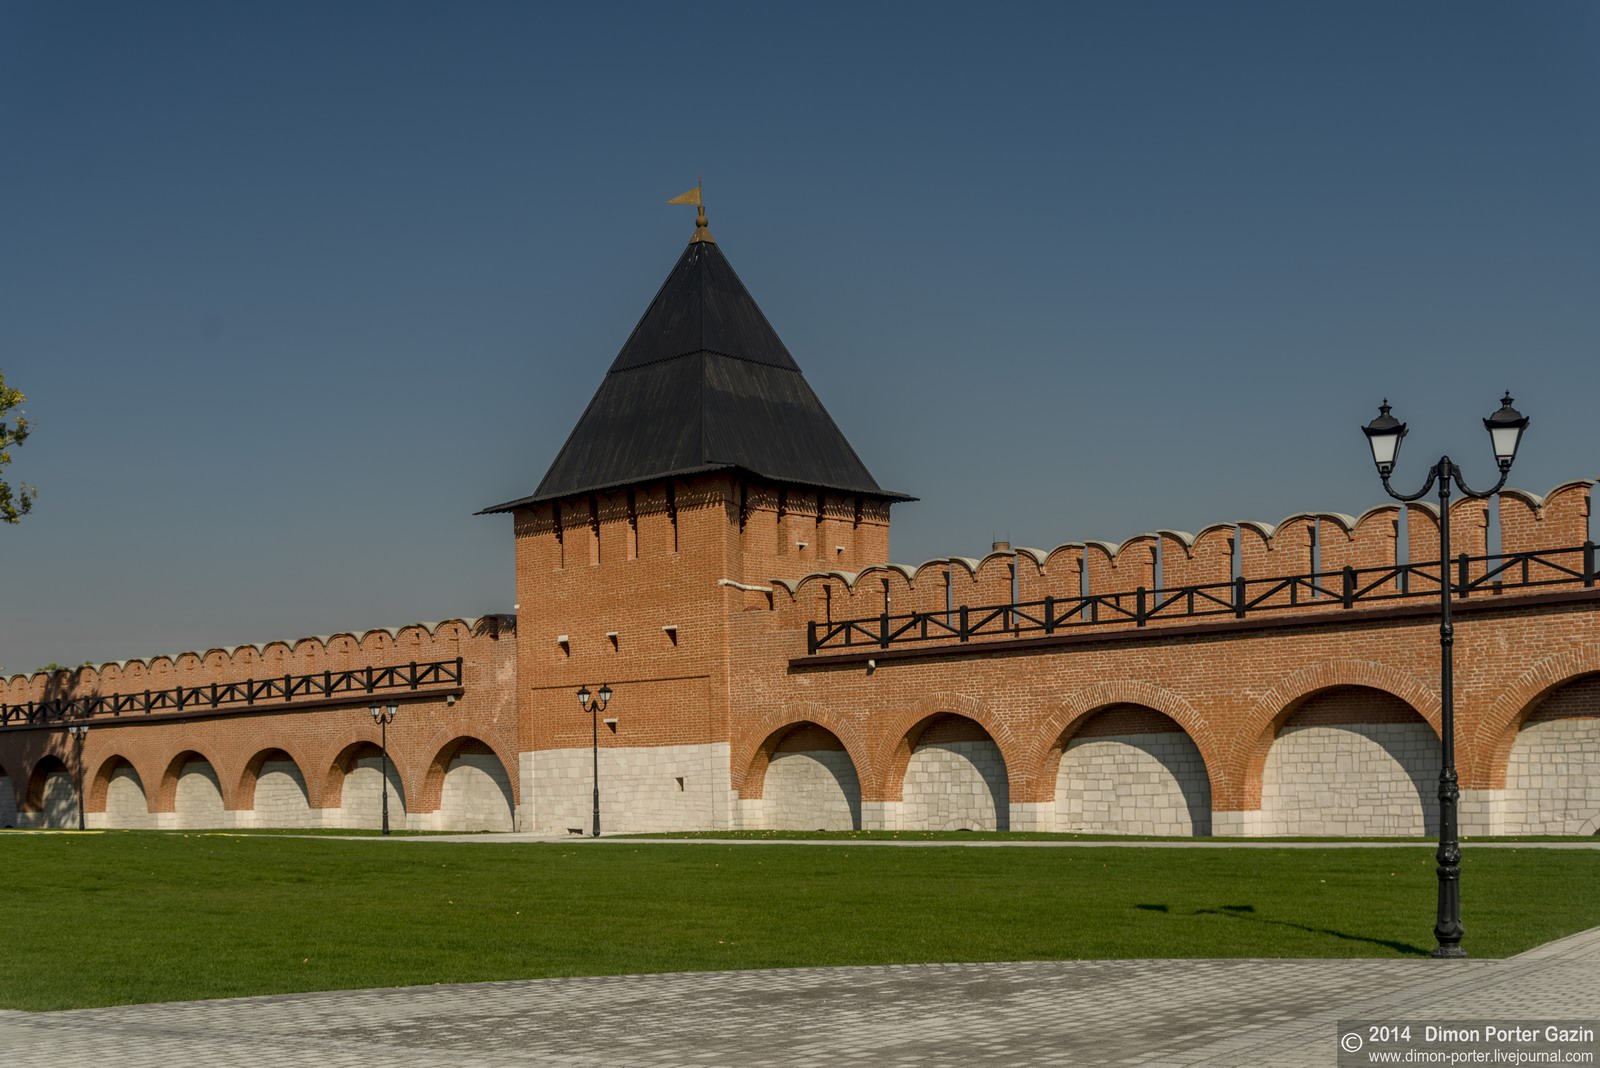 Tula Kremlin one of the oldest fortresses in Russia